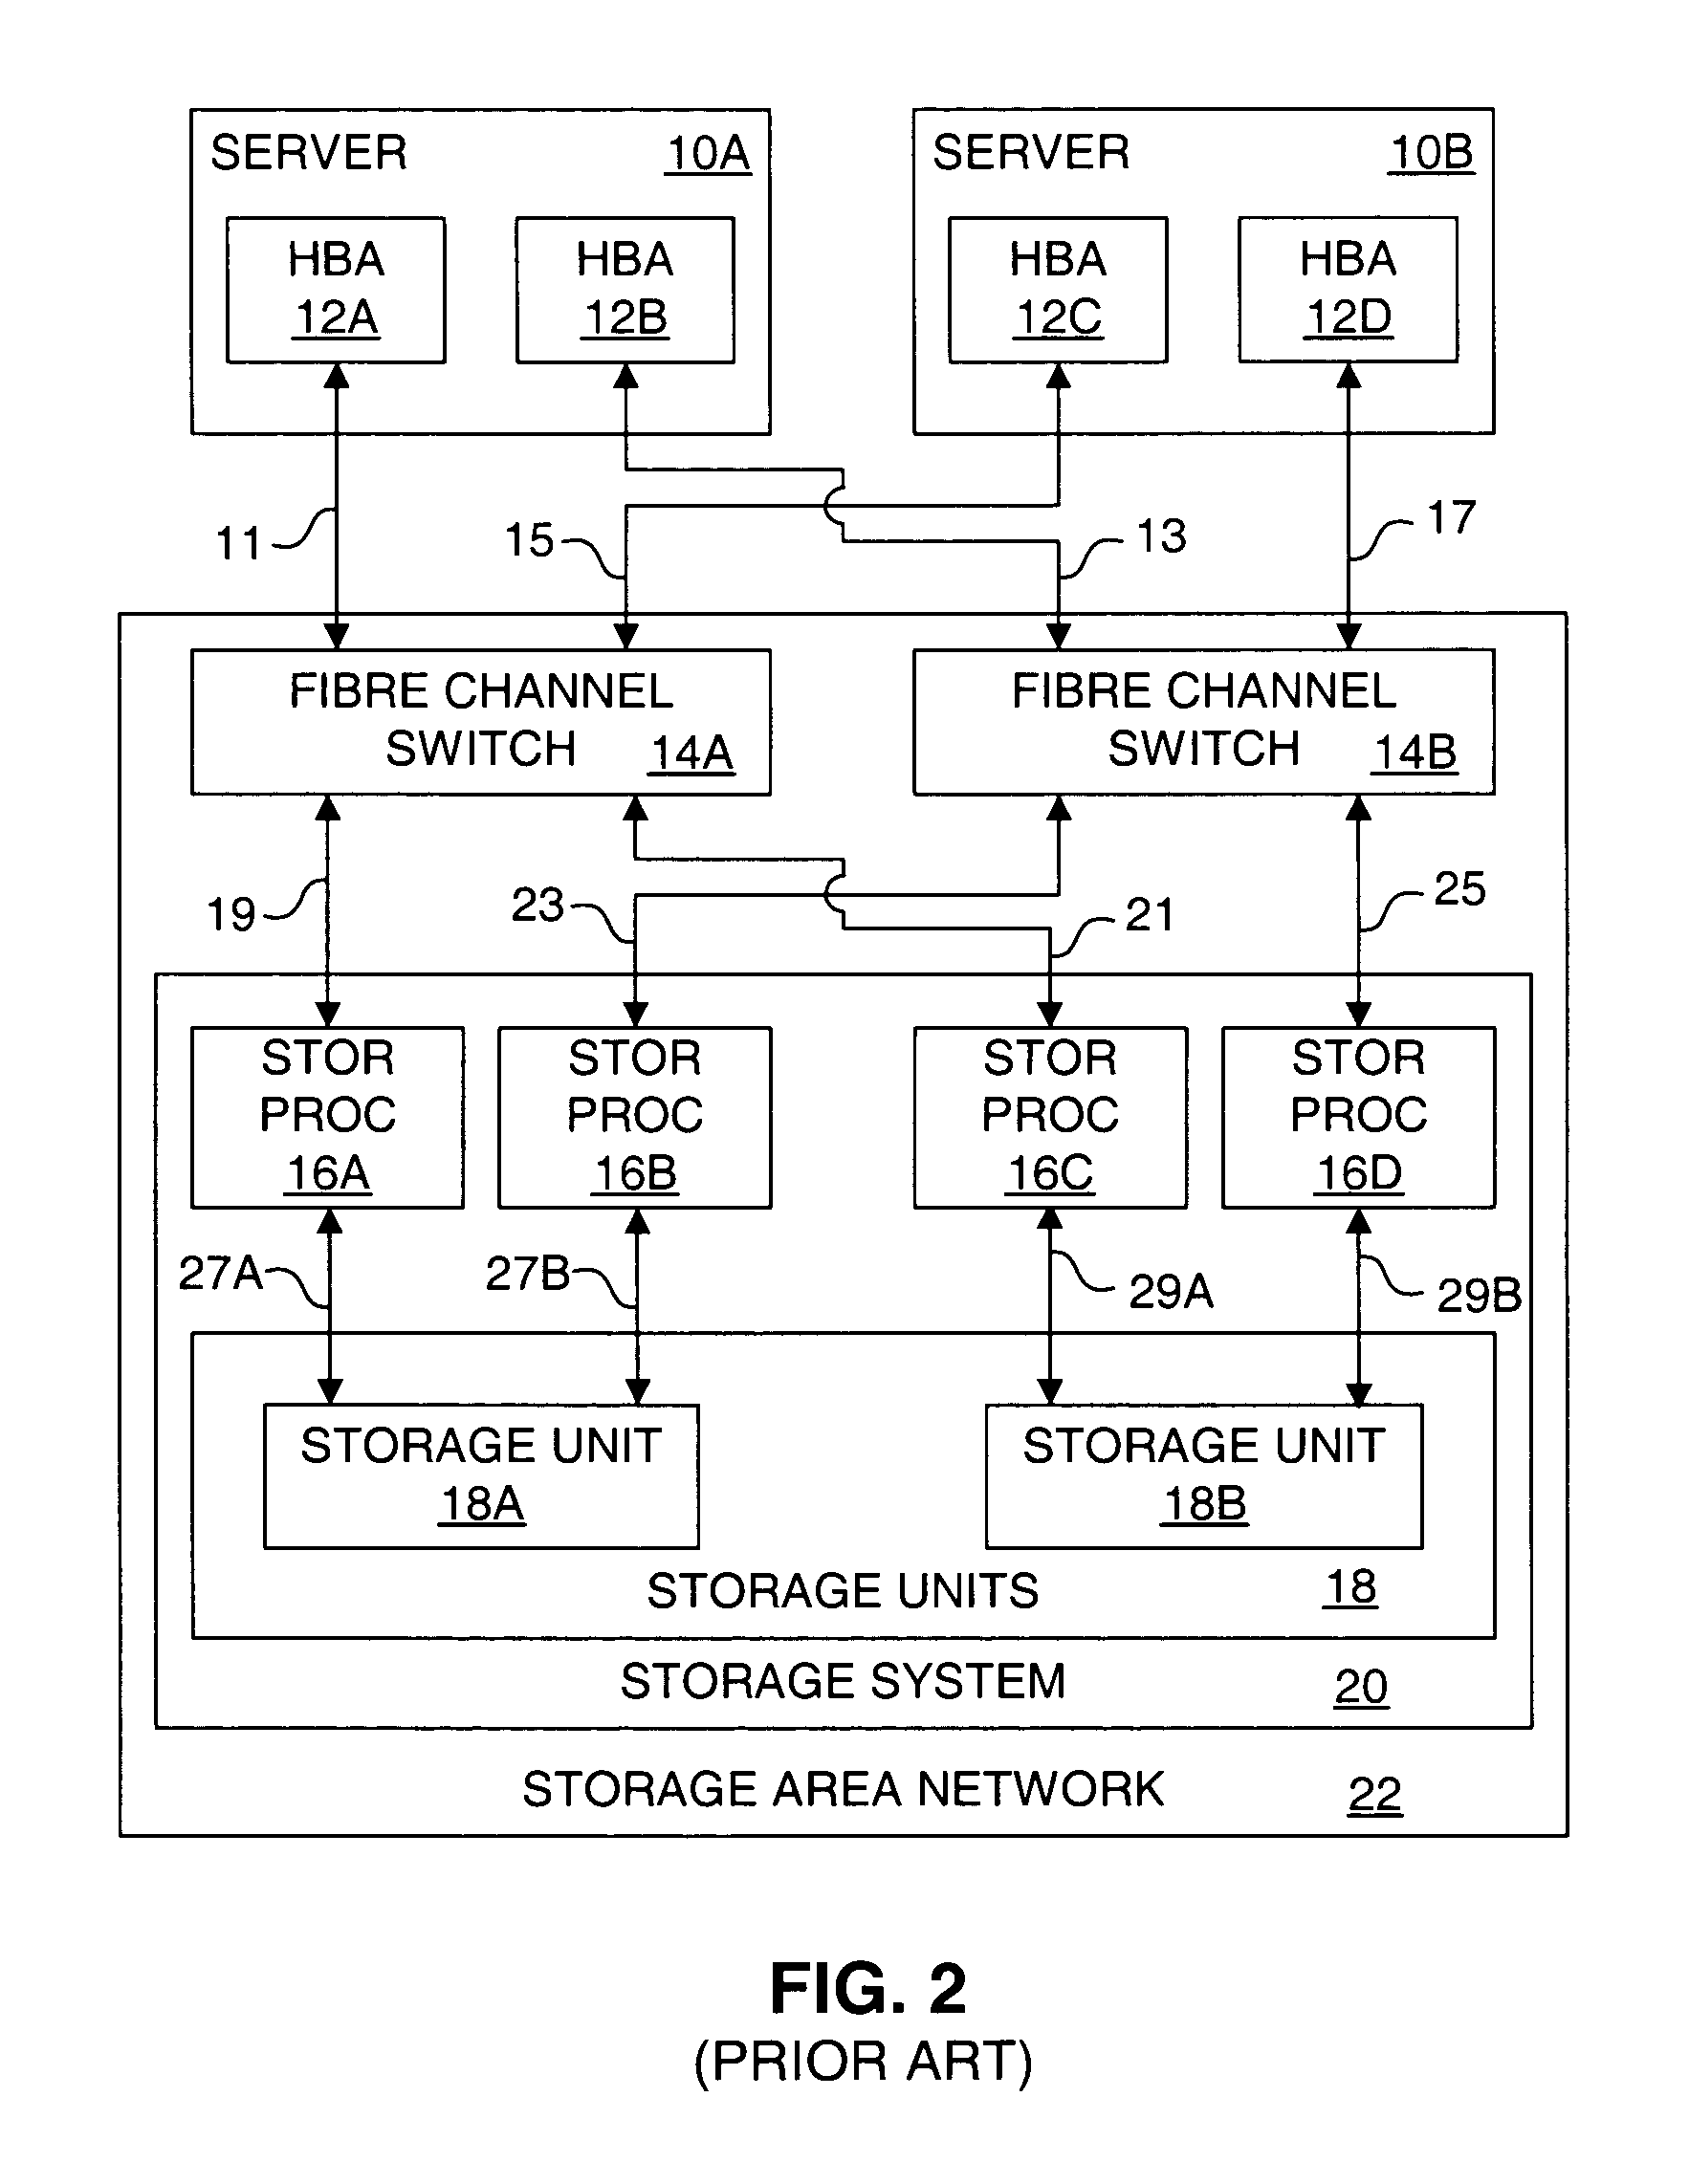 Storage multipath management in a virtual computer system